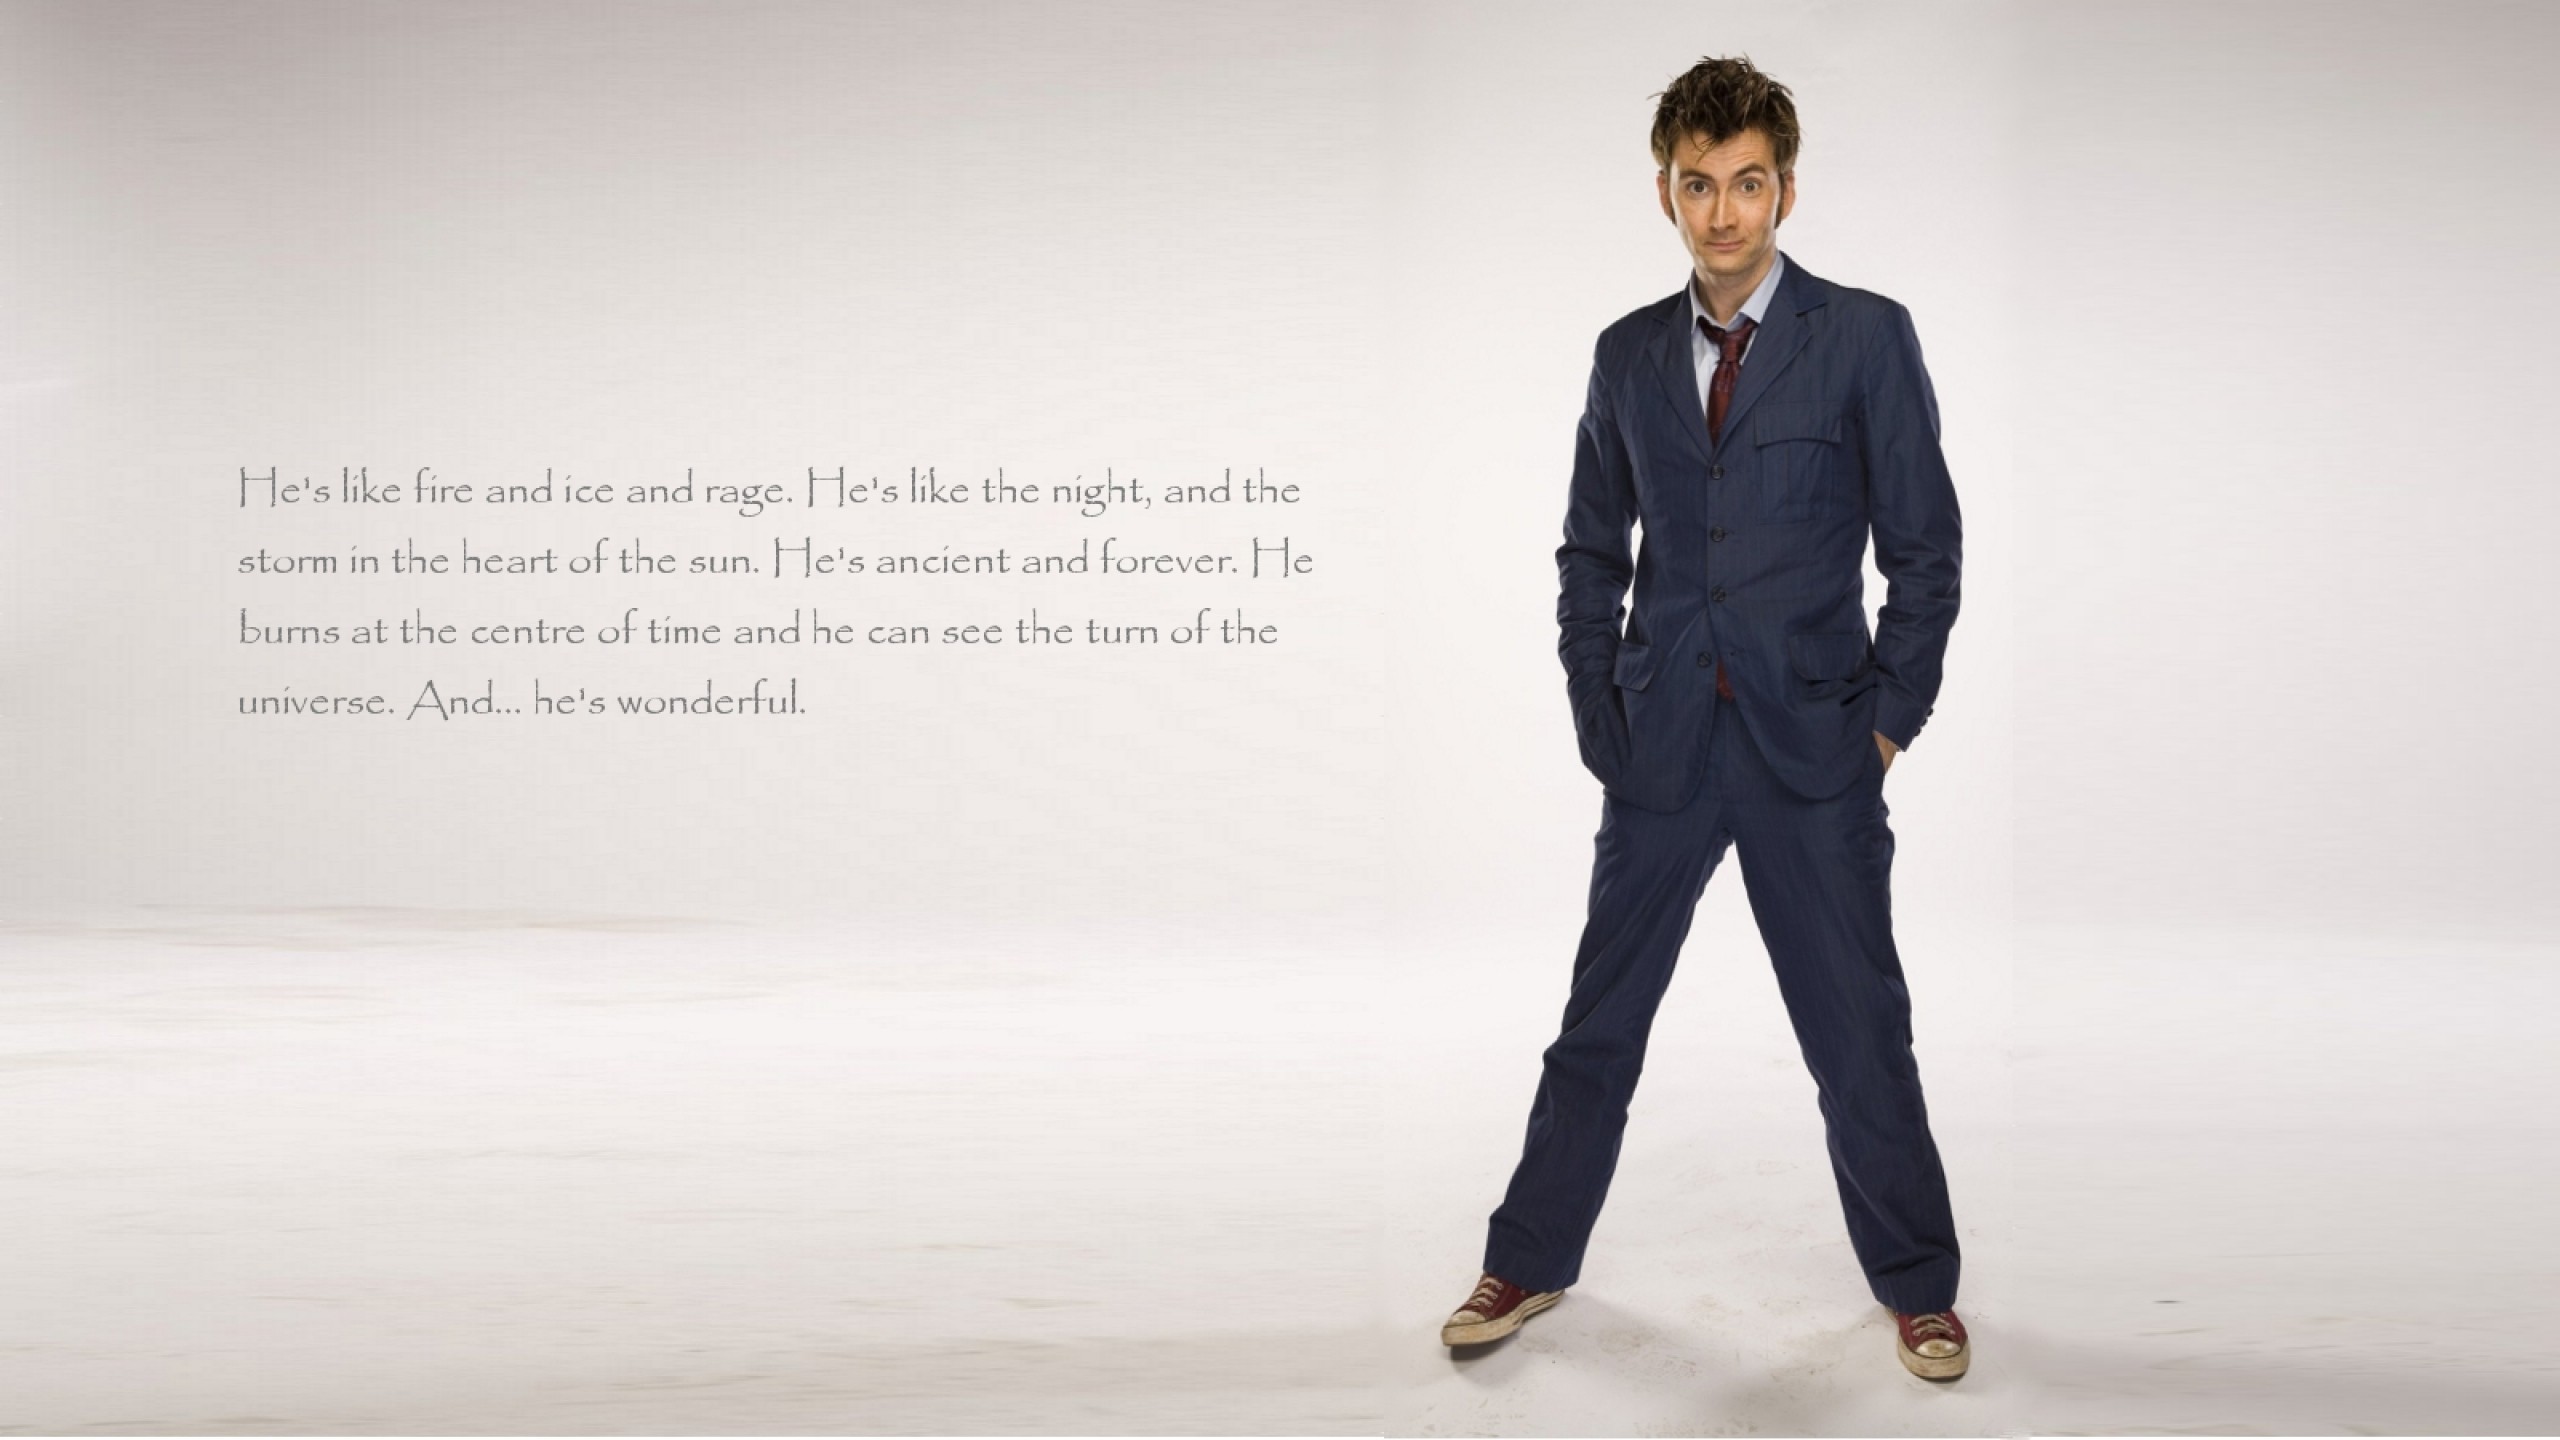 Doctor Who, The Doctor, TARDIS, David Tennant, Tenth Doctor, Quote  Wallpapers HD / Desktop and Mobile Backgrounds